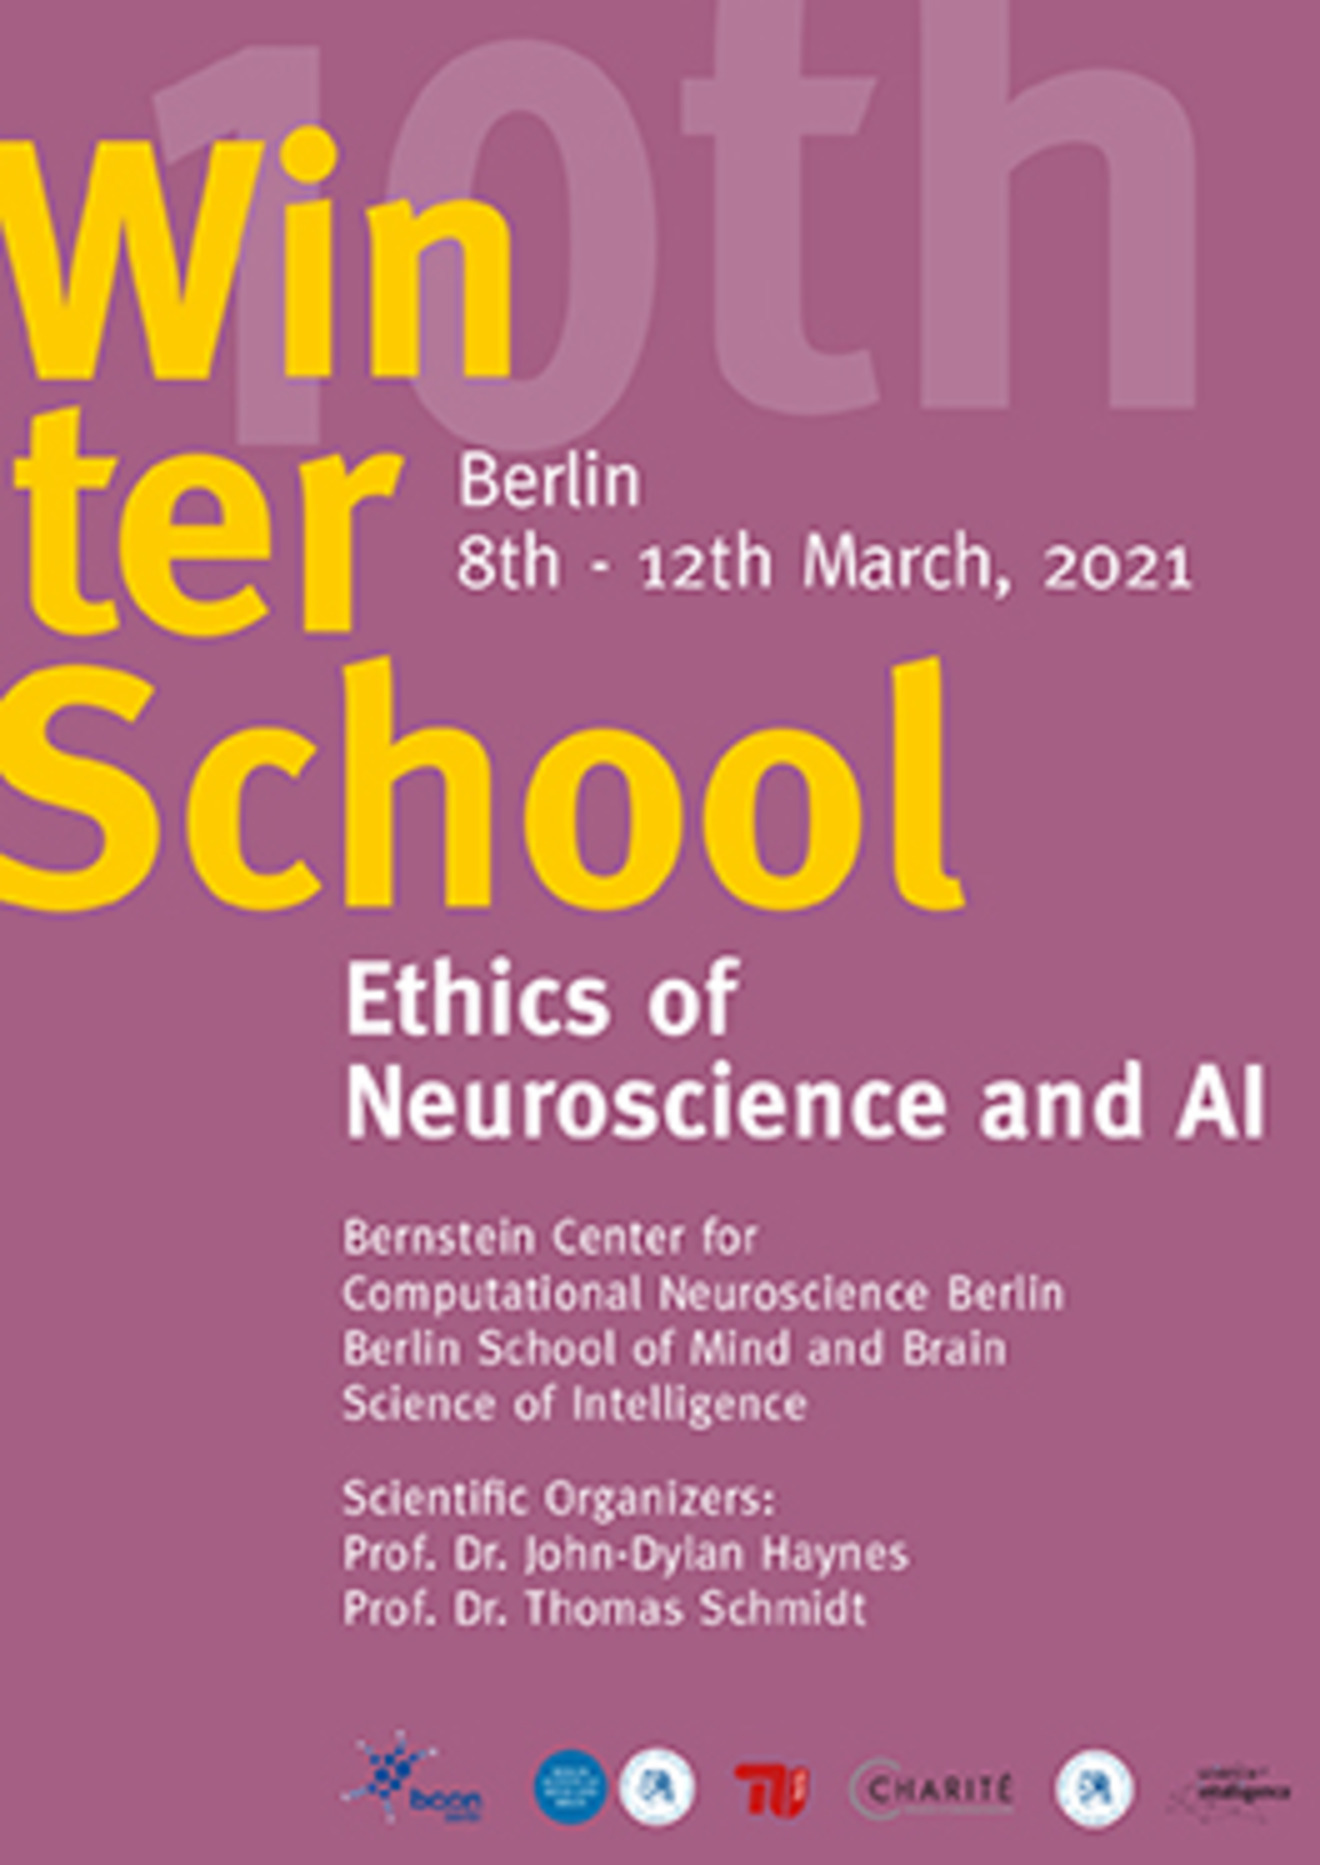 SCIoI joins the BCCN/M&B in the organization of the Winter School “Ethics of Neuroscience and AI”